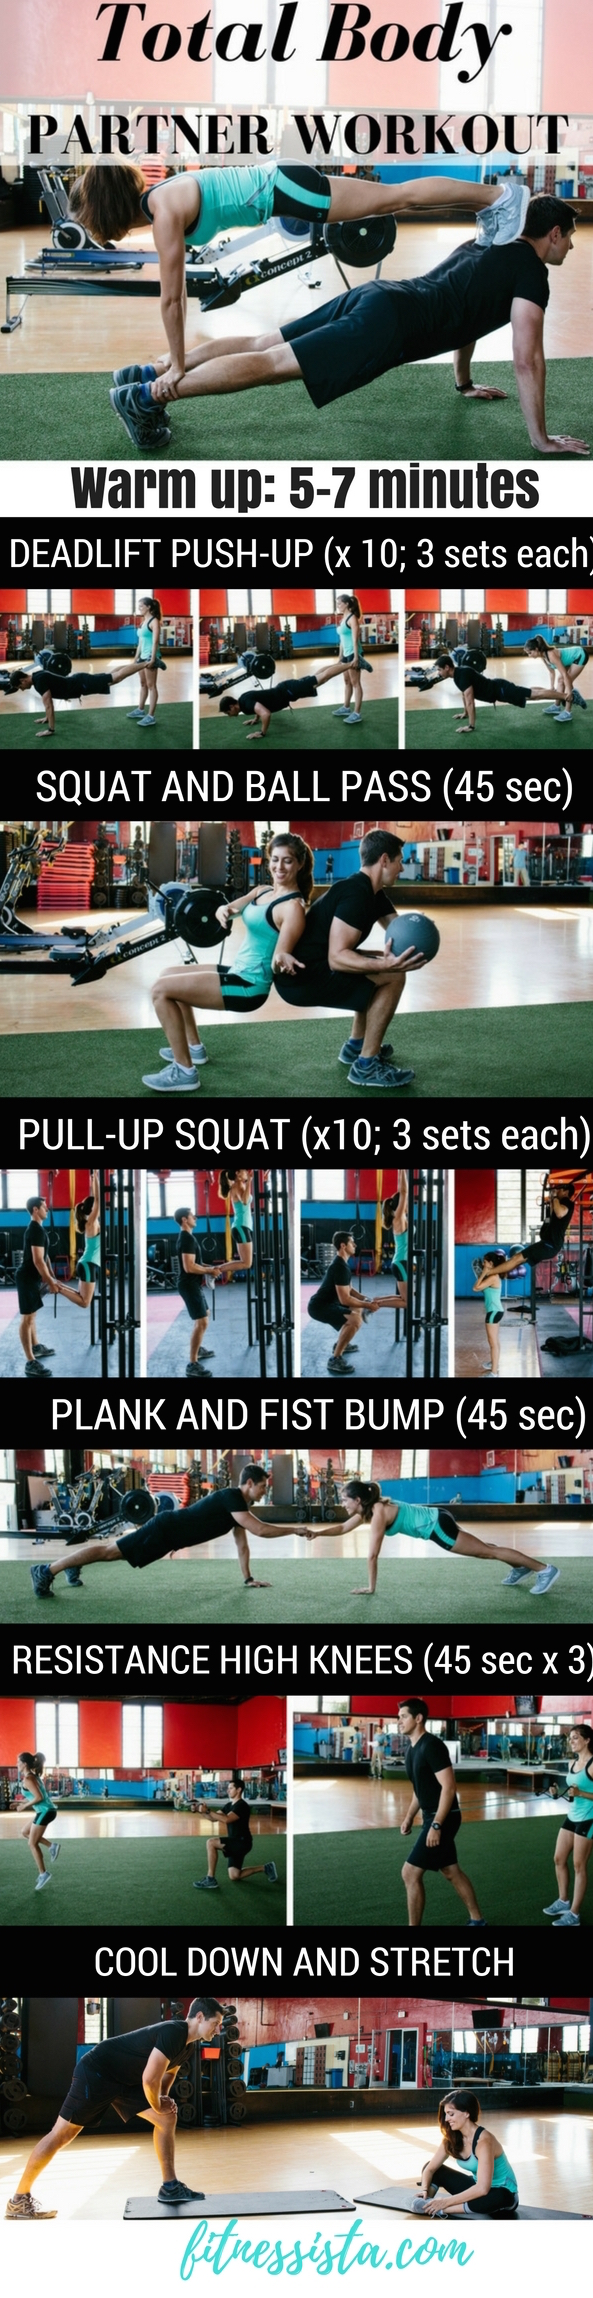 Total body partner workout